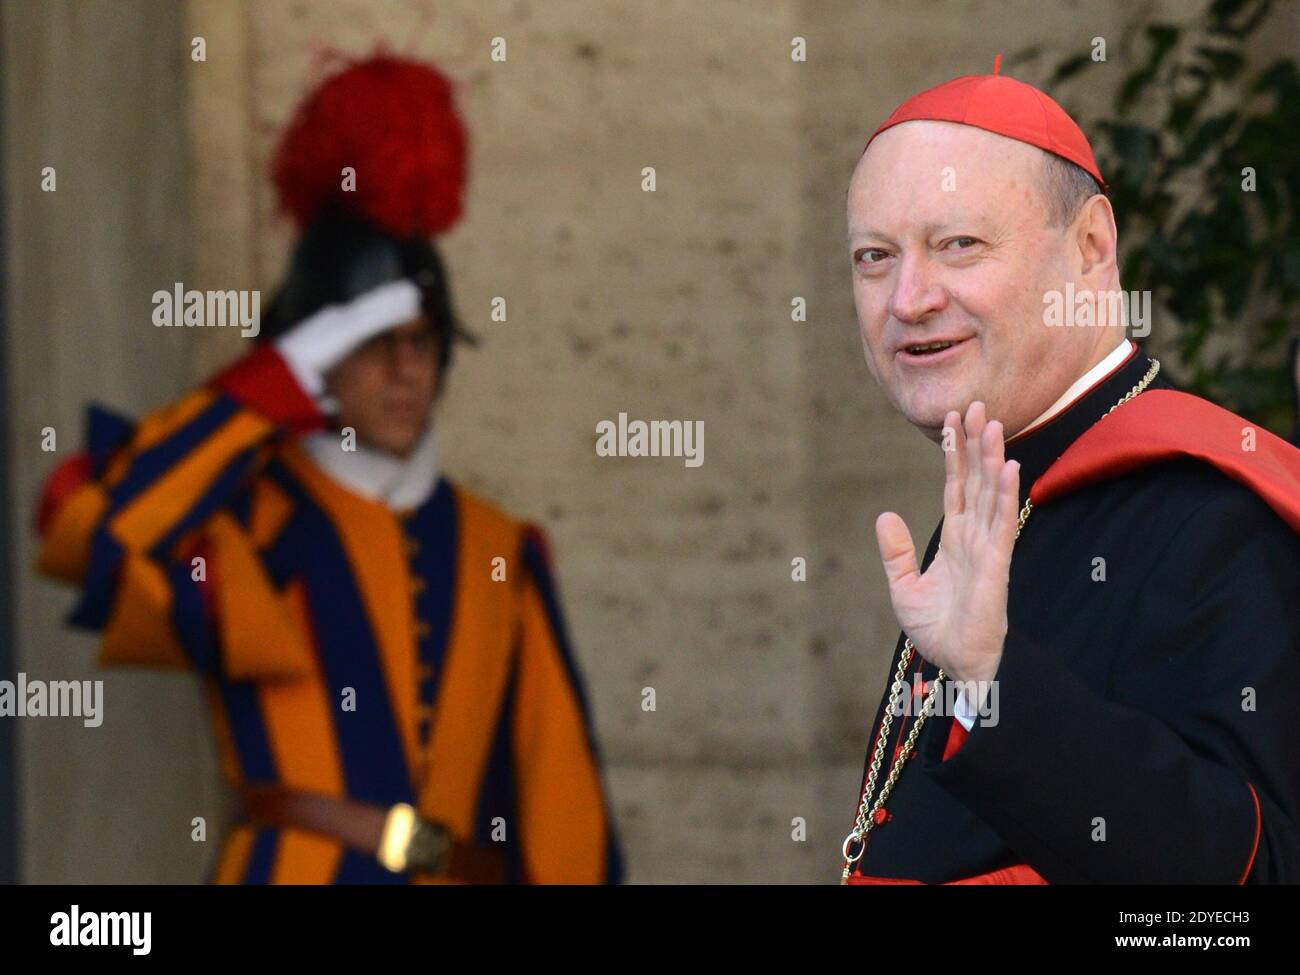 Italian Cardinal Gianfranco Ravasi arrives for a meeting at the Synod Hall  in the Vatican March 4, 2013. Preparations for electing Roman Catholicism's  new leader begin in earnest on Monday as the